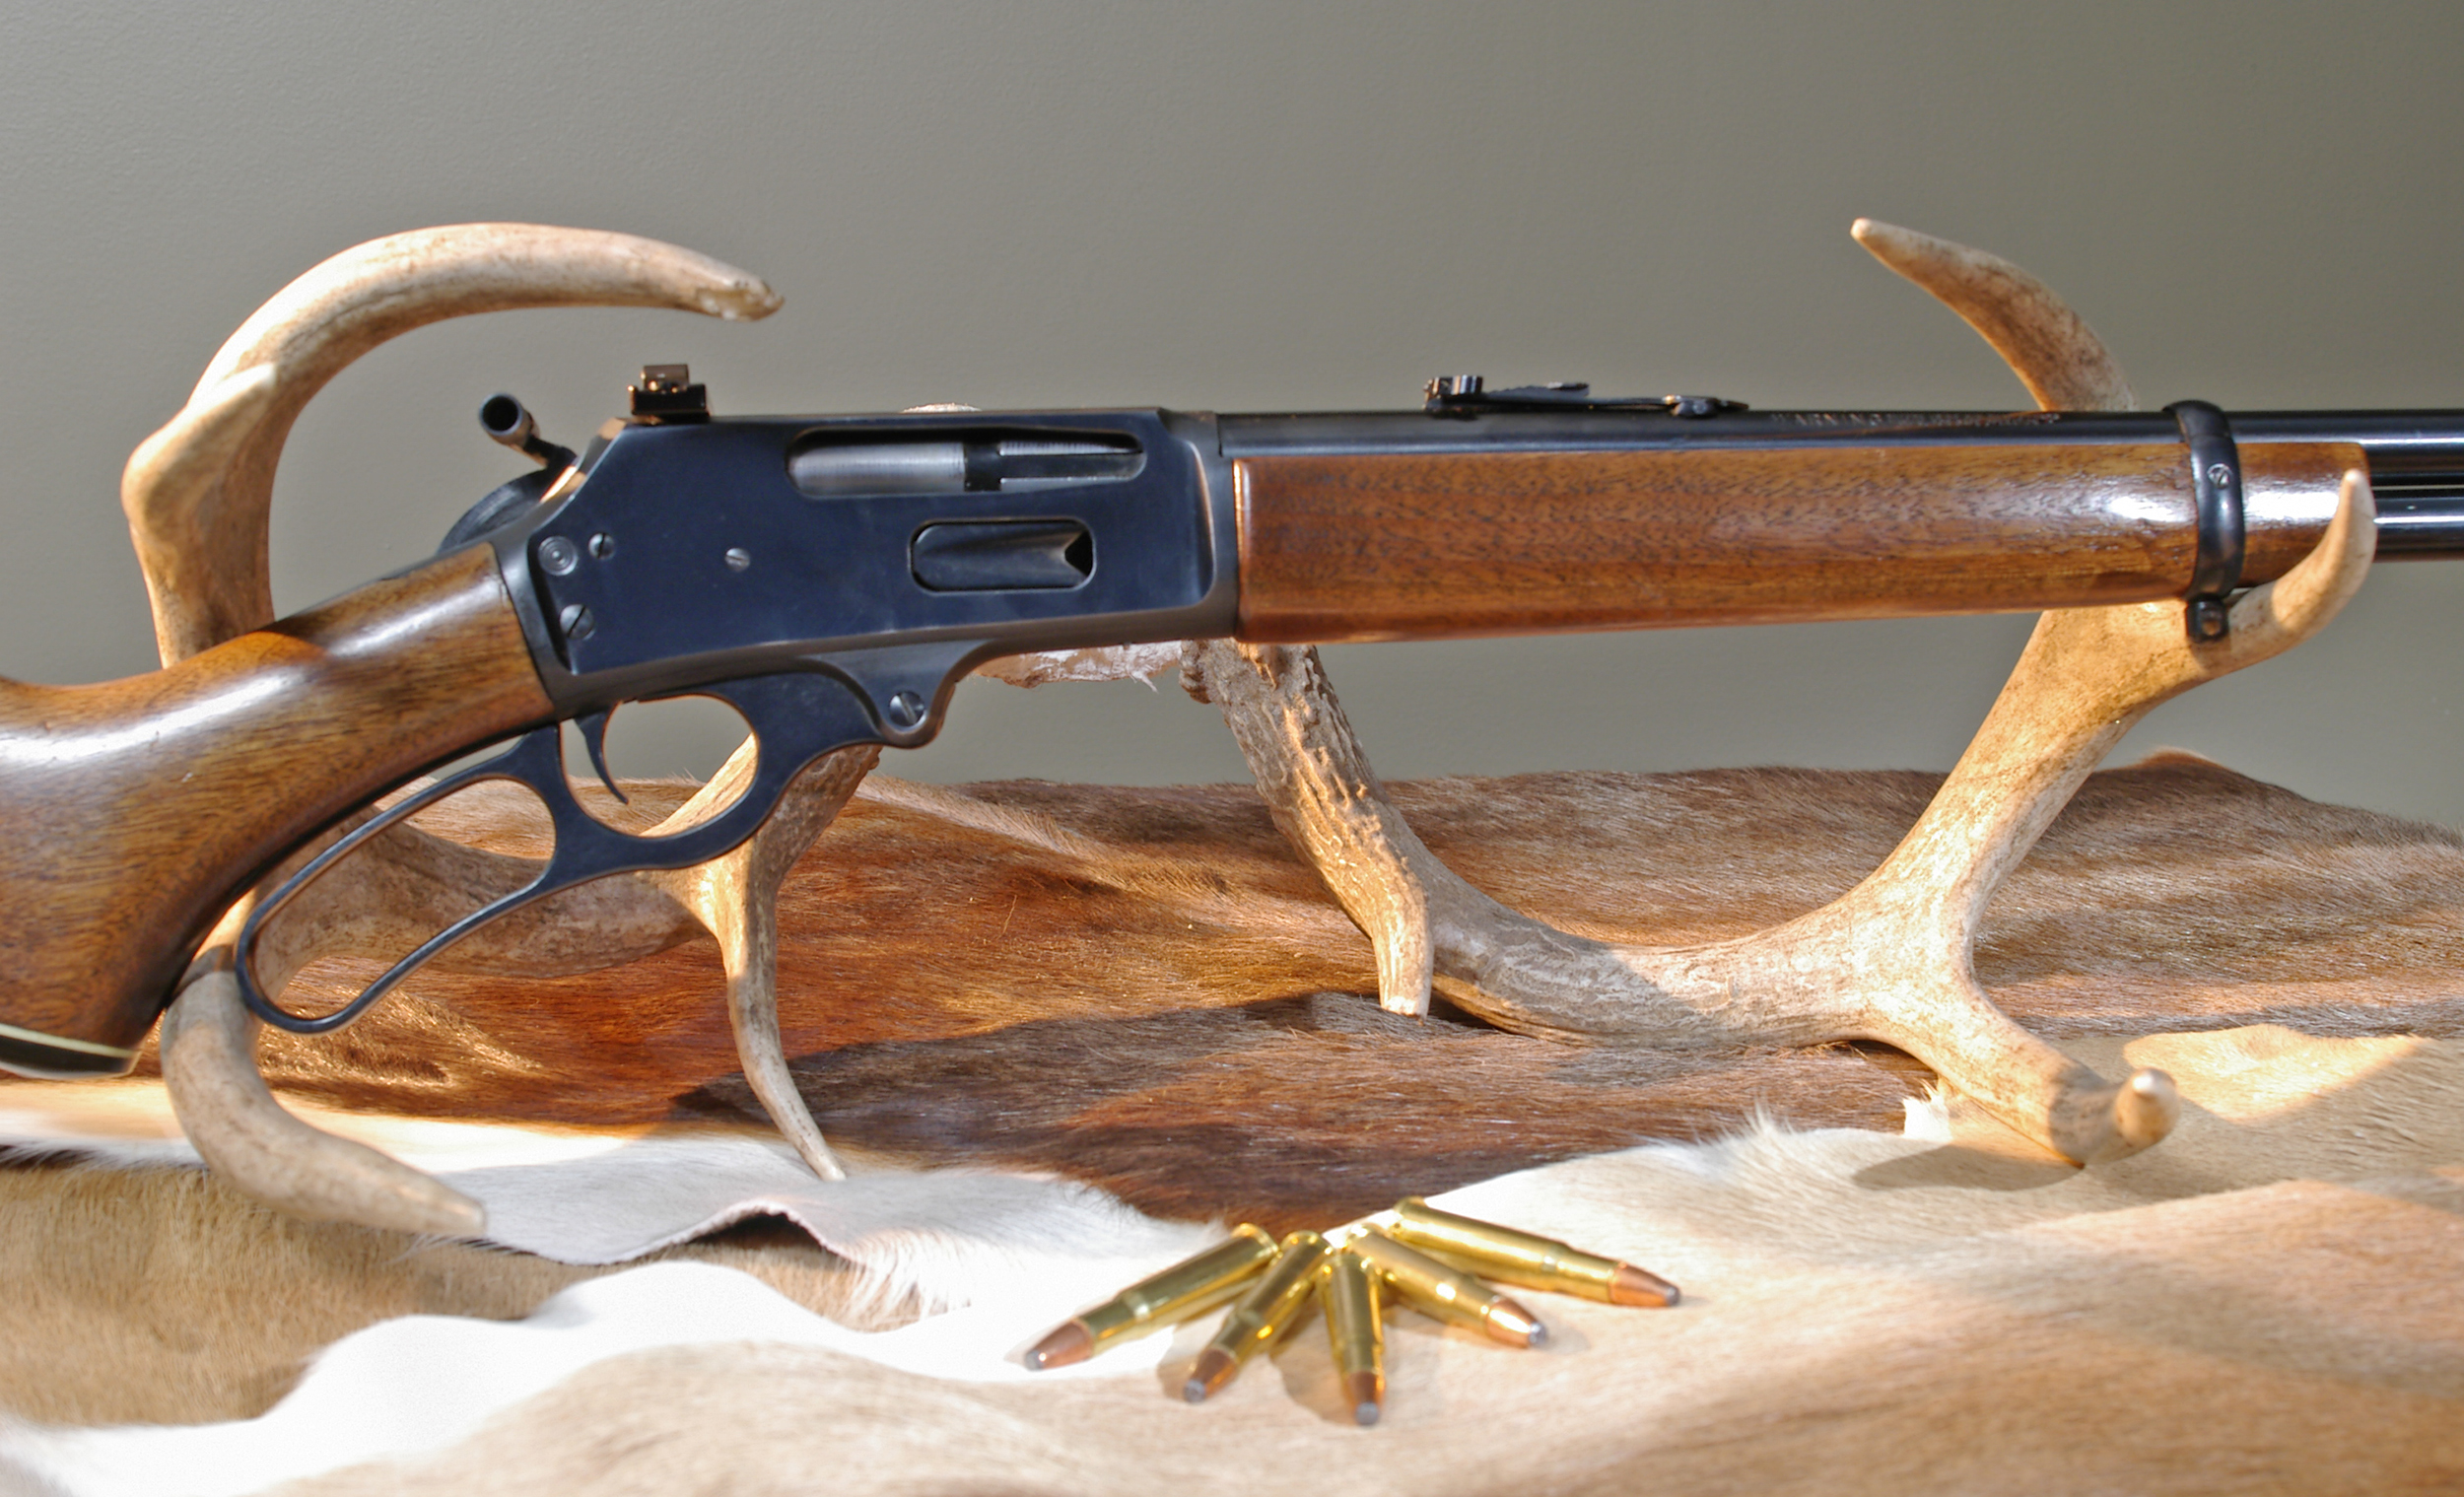 Marlin M336 with ammo, is a classic rifle.